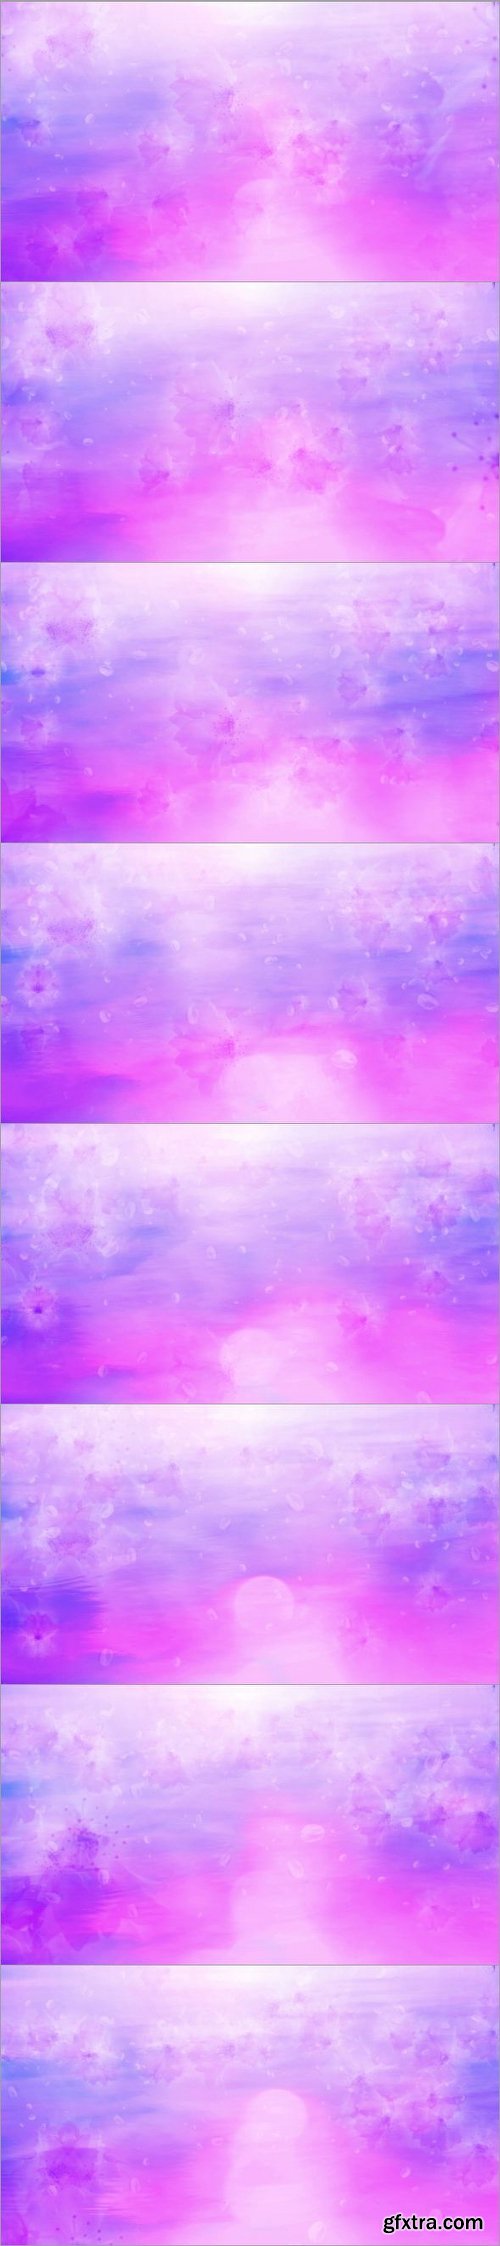 Falling Flowers Background Animation Loop